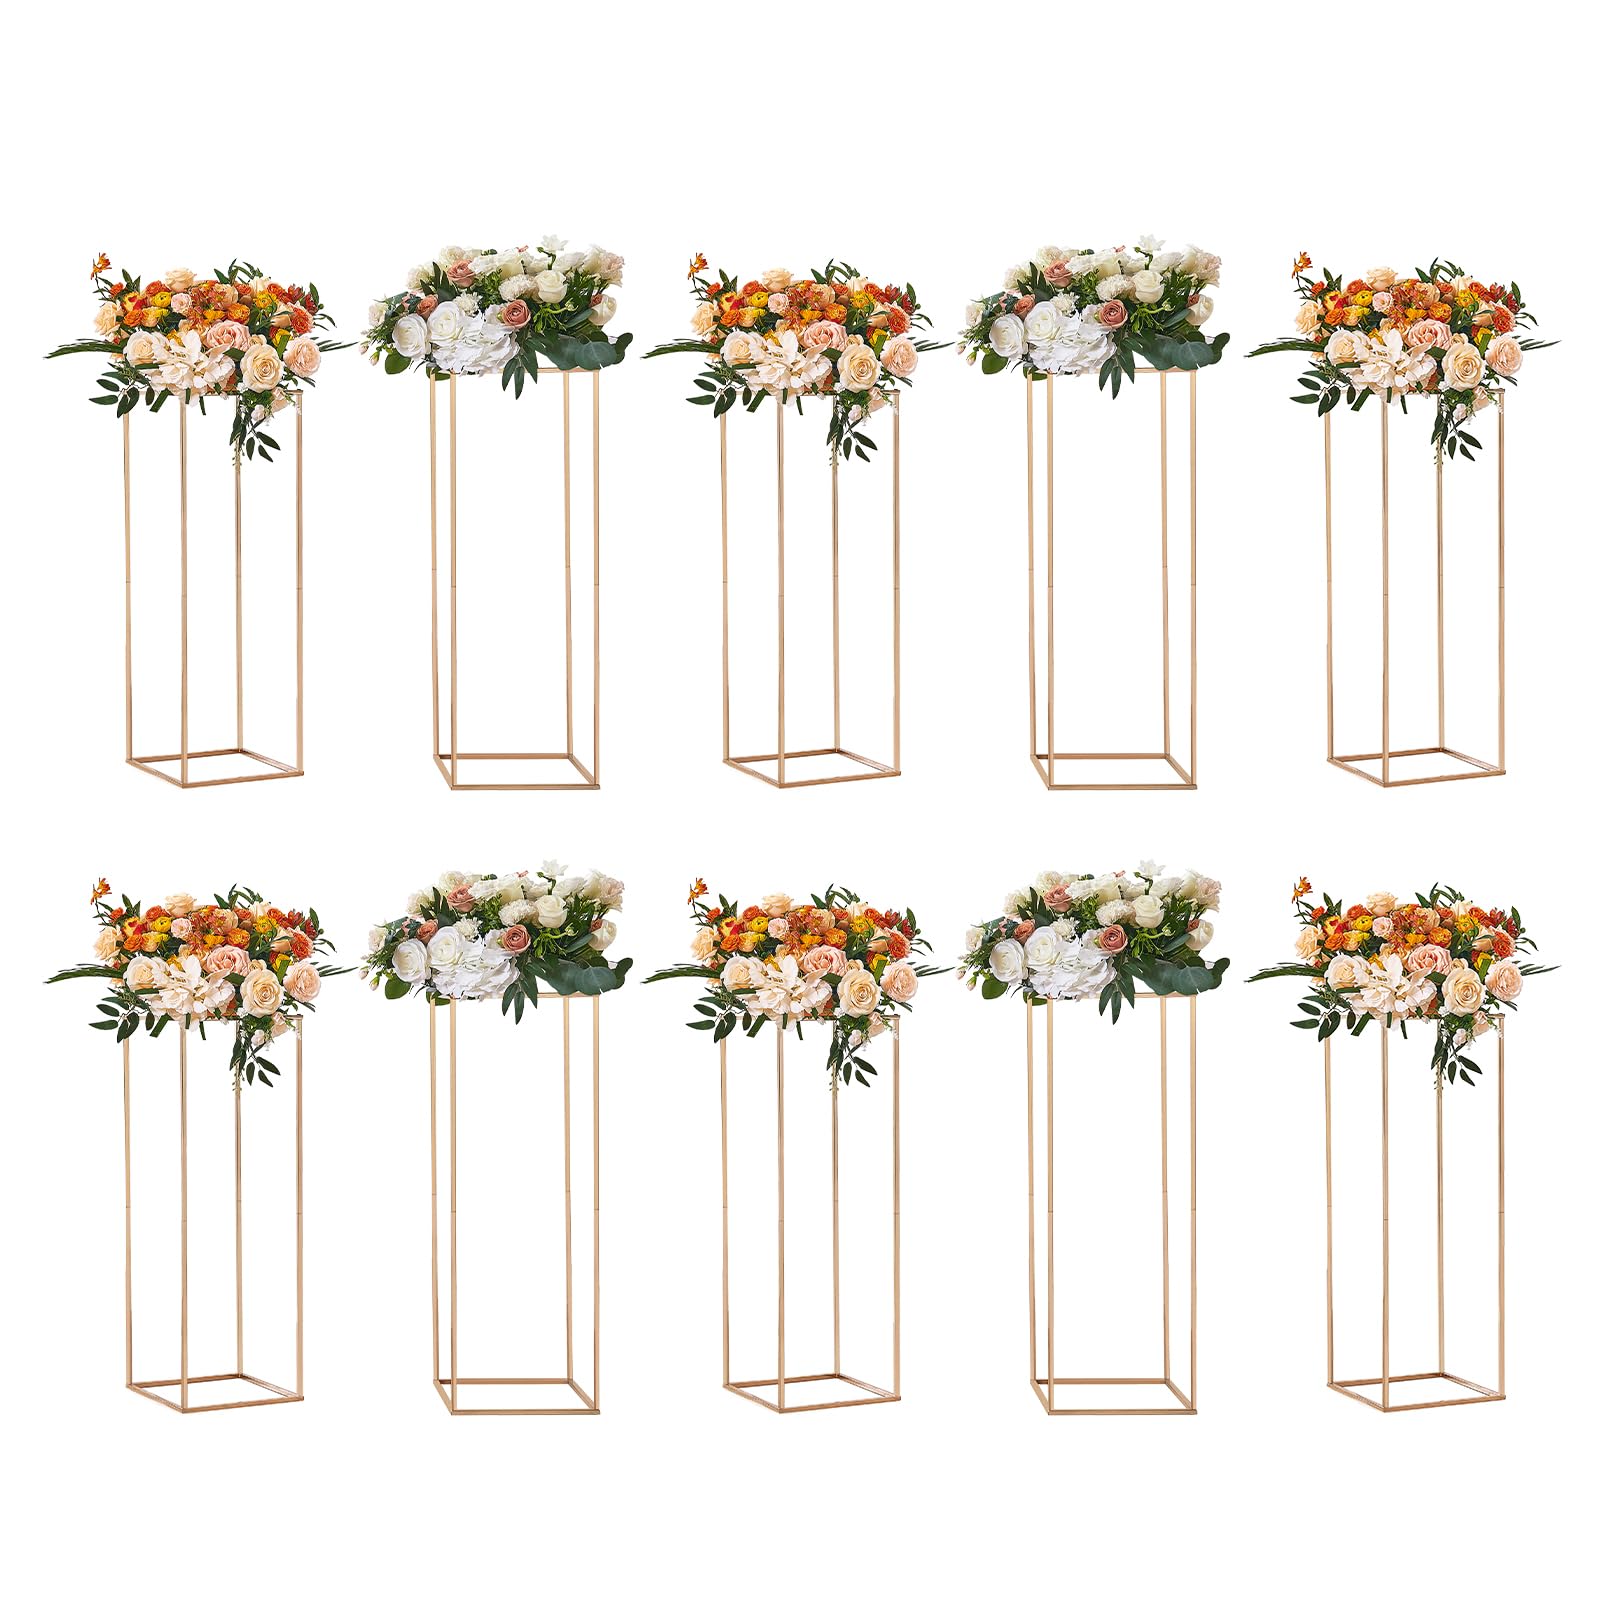 VEVOR 10PCS 31.5inch High Wedding Flower Stand, With Acrylic Laminate,Metal Vase Column Geometric Centerpiece Stands, Gold Rectangular Floral Display Rack for Events Reception, Party Decoration